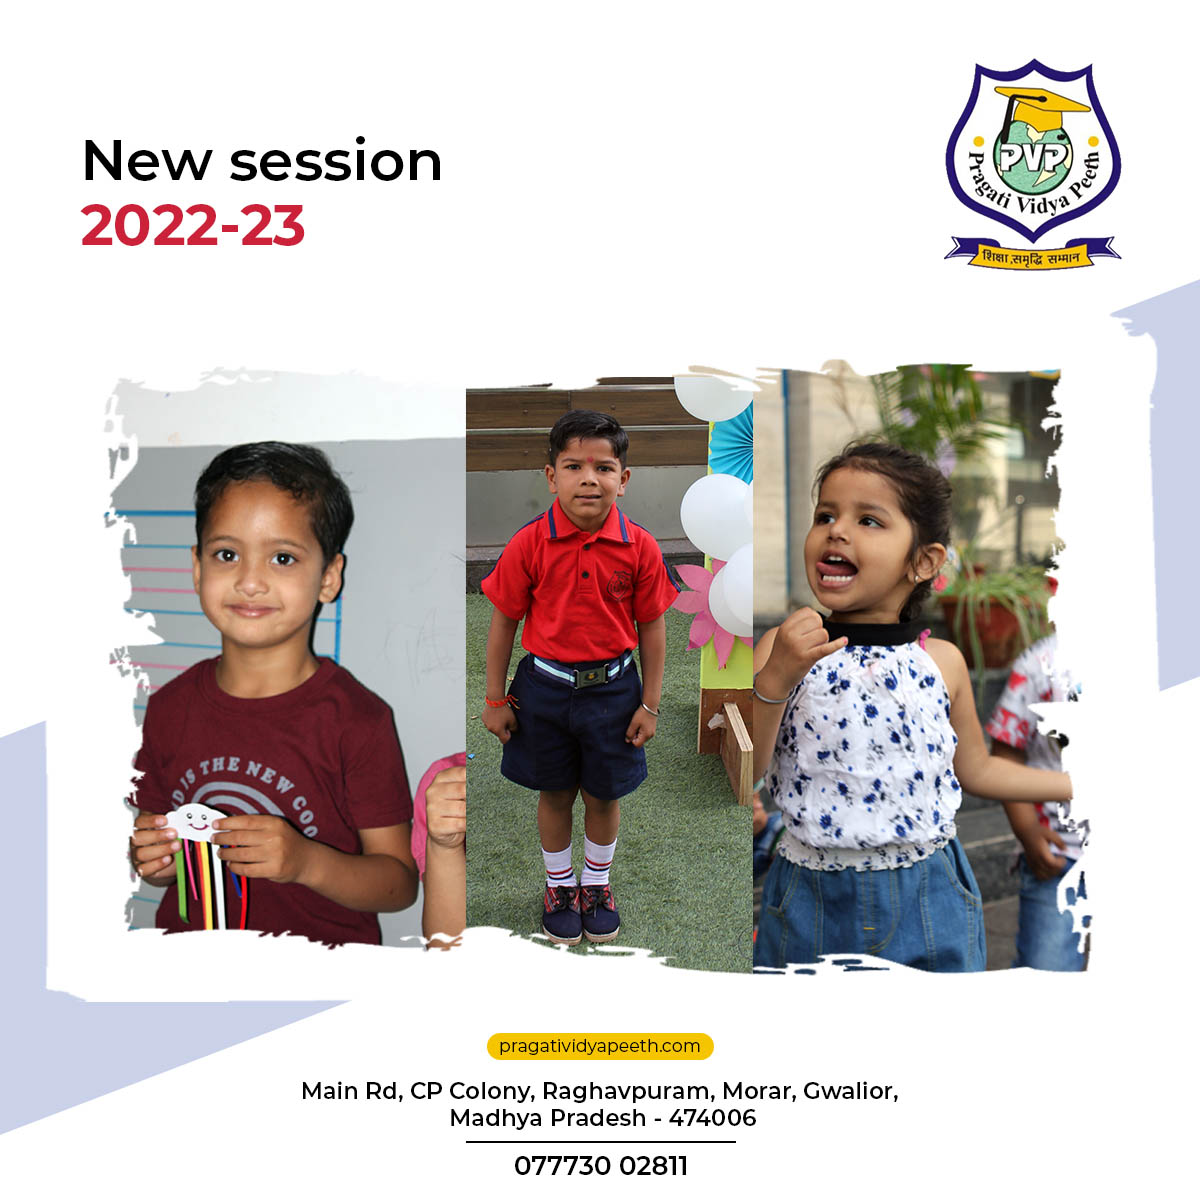 New Session 2022 - 23